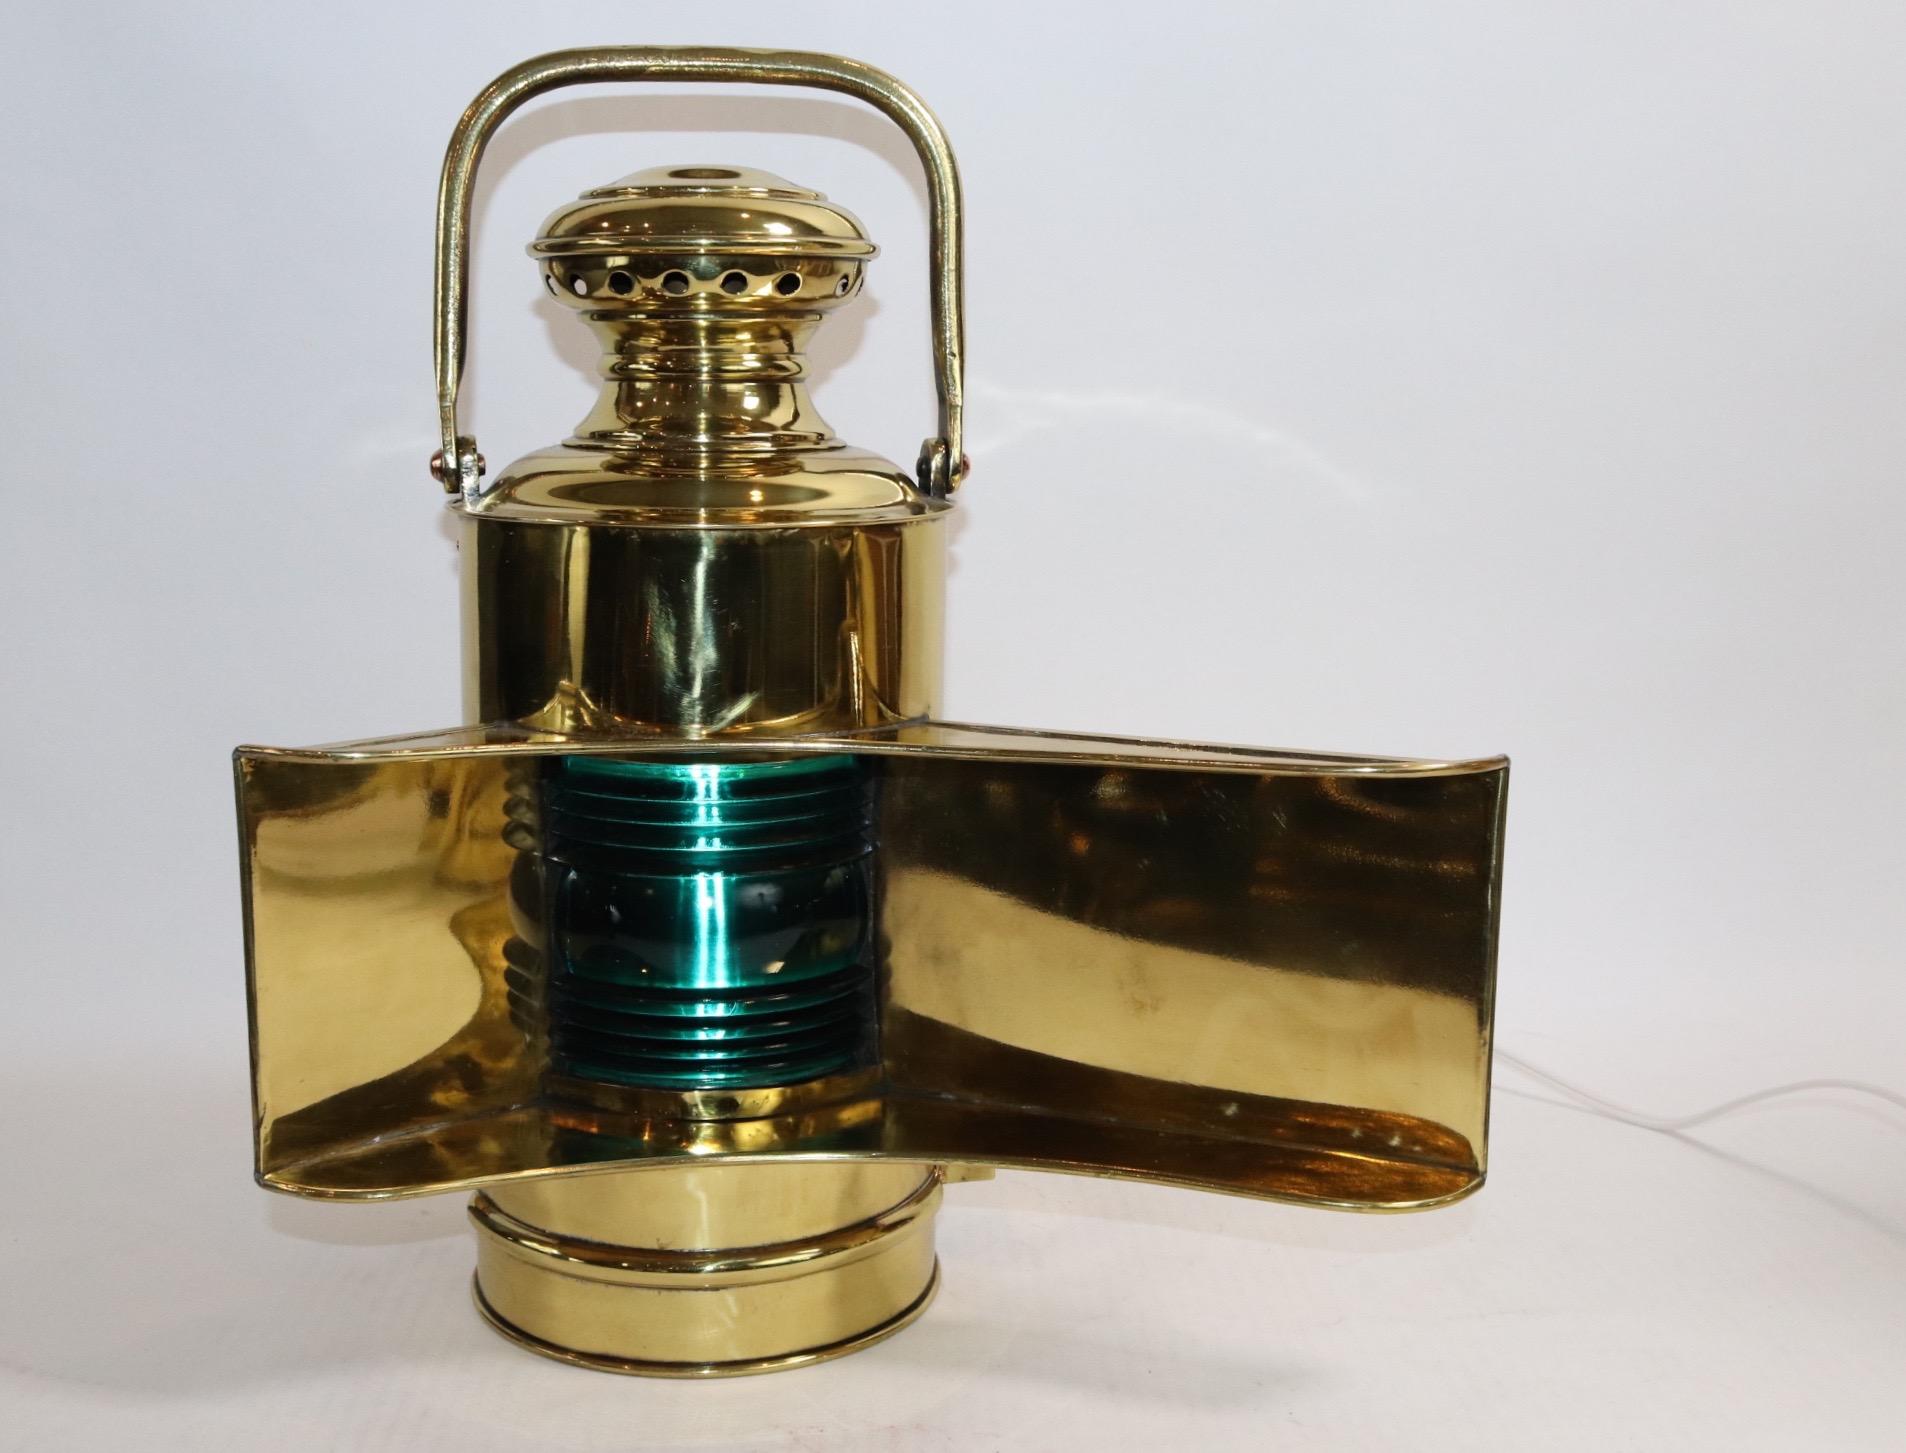 Rare pair of World War One battleship port and starboard ship lanterns with wide bezels, fresnel glass lenses, carry handles, hinged doors. Both have been meticulously polished and lacquered. The lanterns have been wired for home display. Weight is